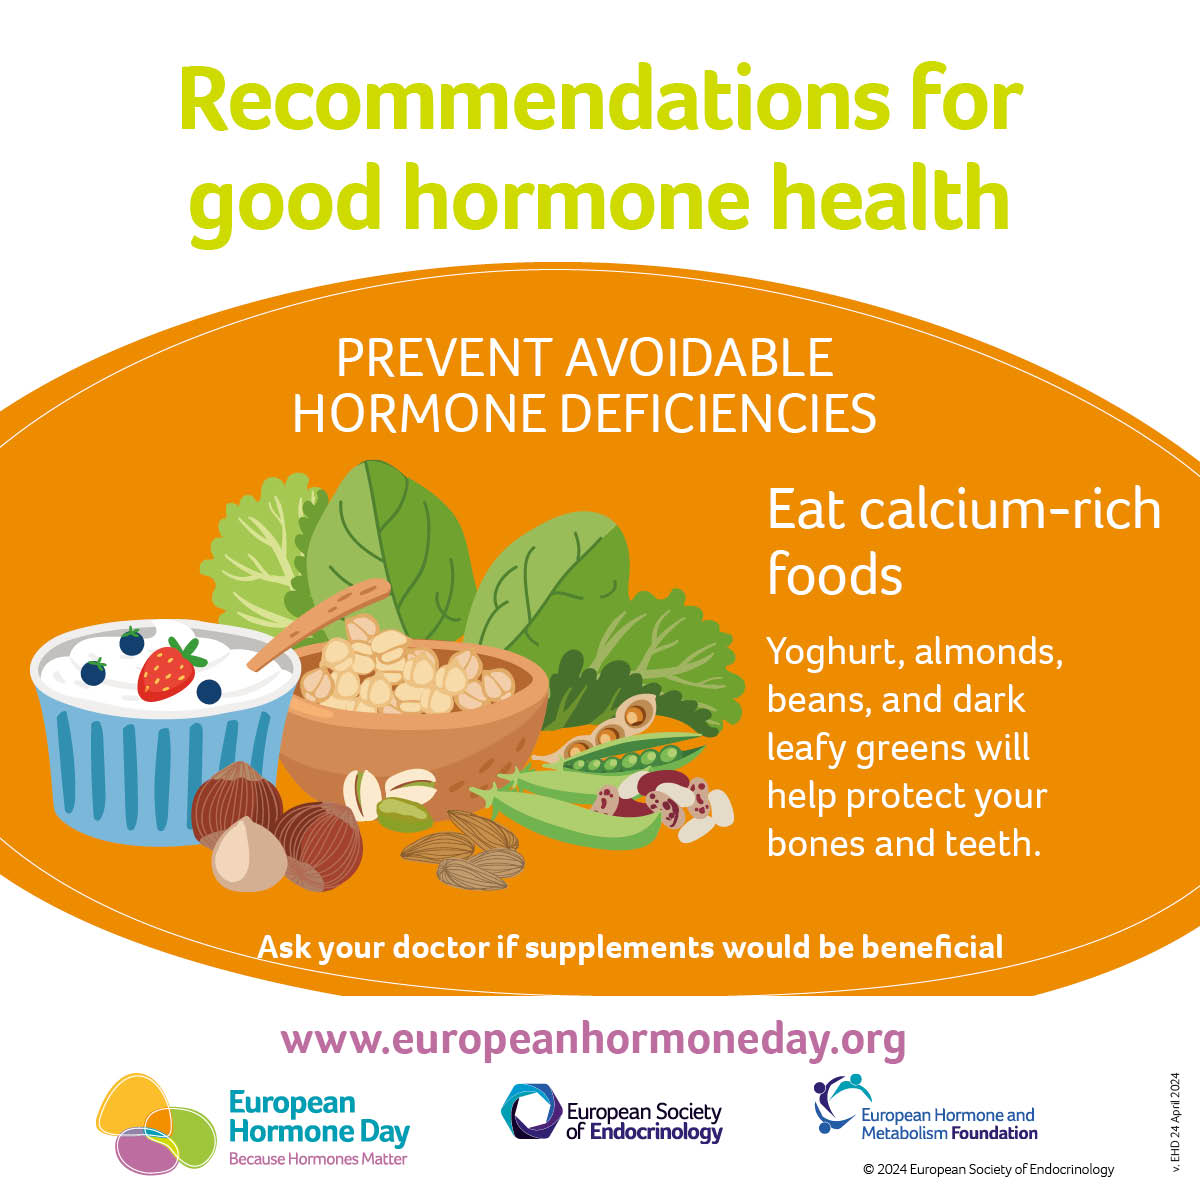 6 days to go until European Hormone Day! To count us down, we’re sharing the 10 Recommendations for Good Hormone Health. Today we’re highlighting… eat calcium-rich foods! 🥬 #endocrinology #europeanhormoneday #becausehormonesmatter #EDCs #hormonehealth